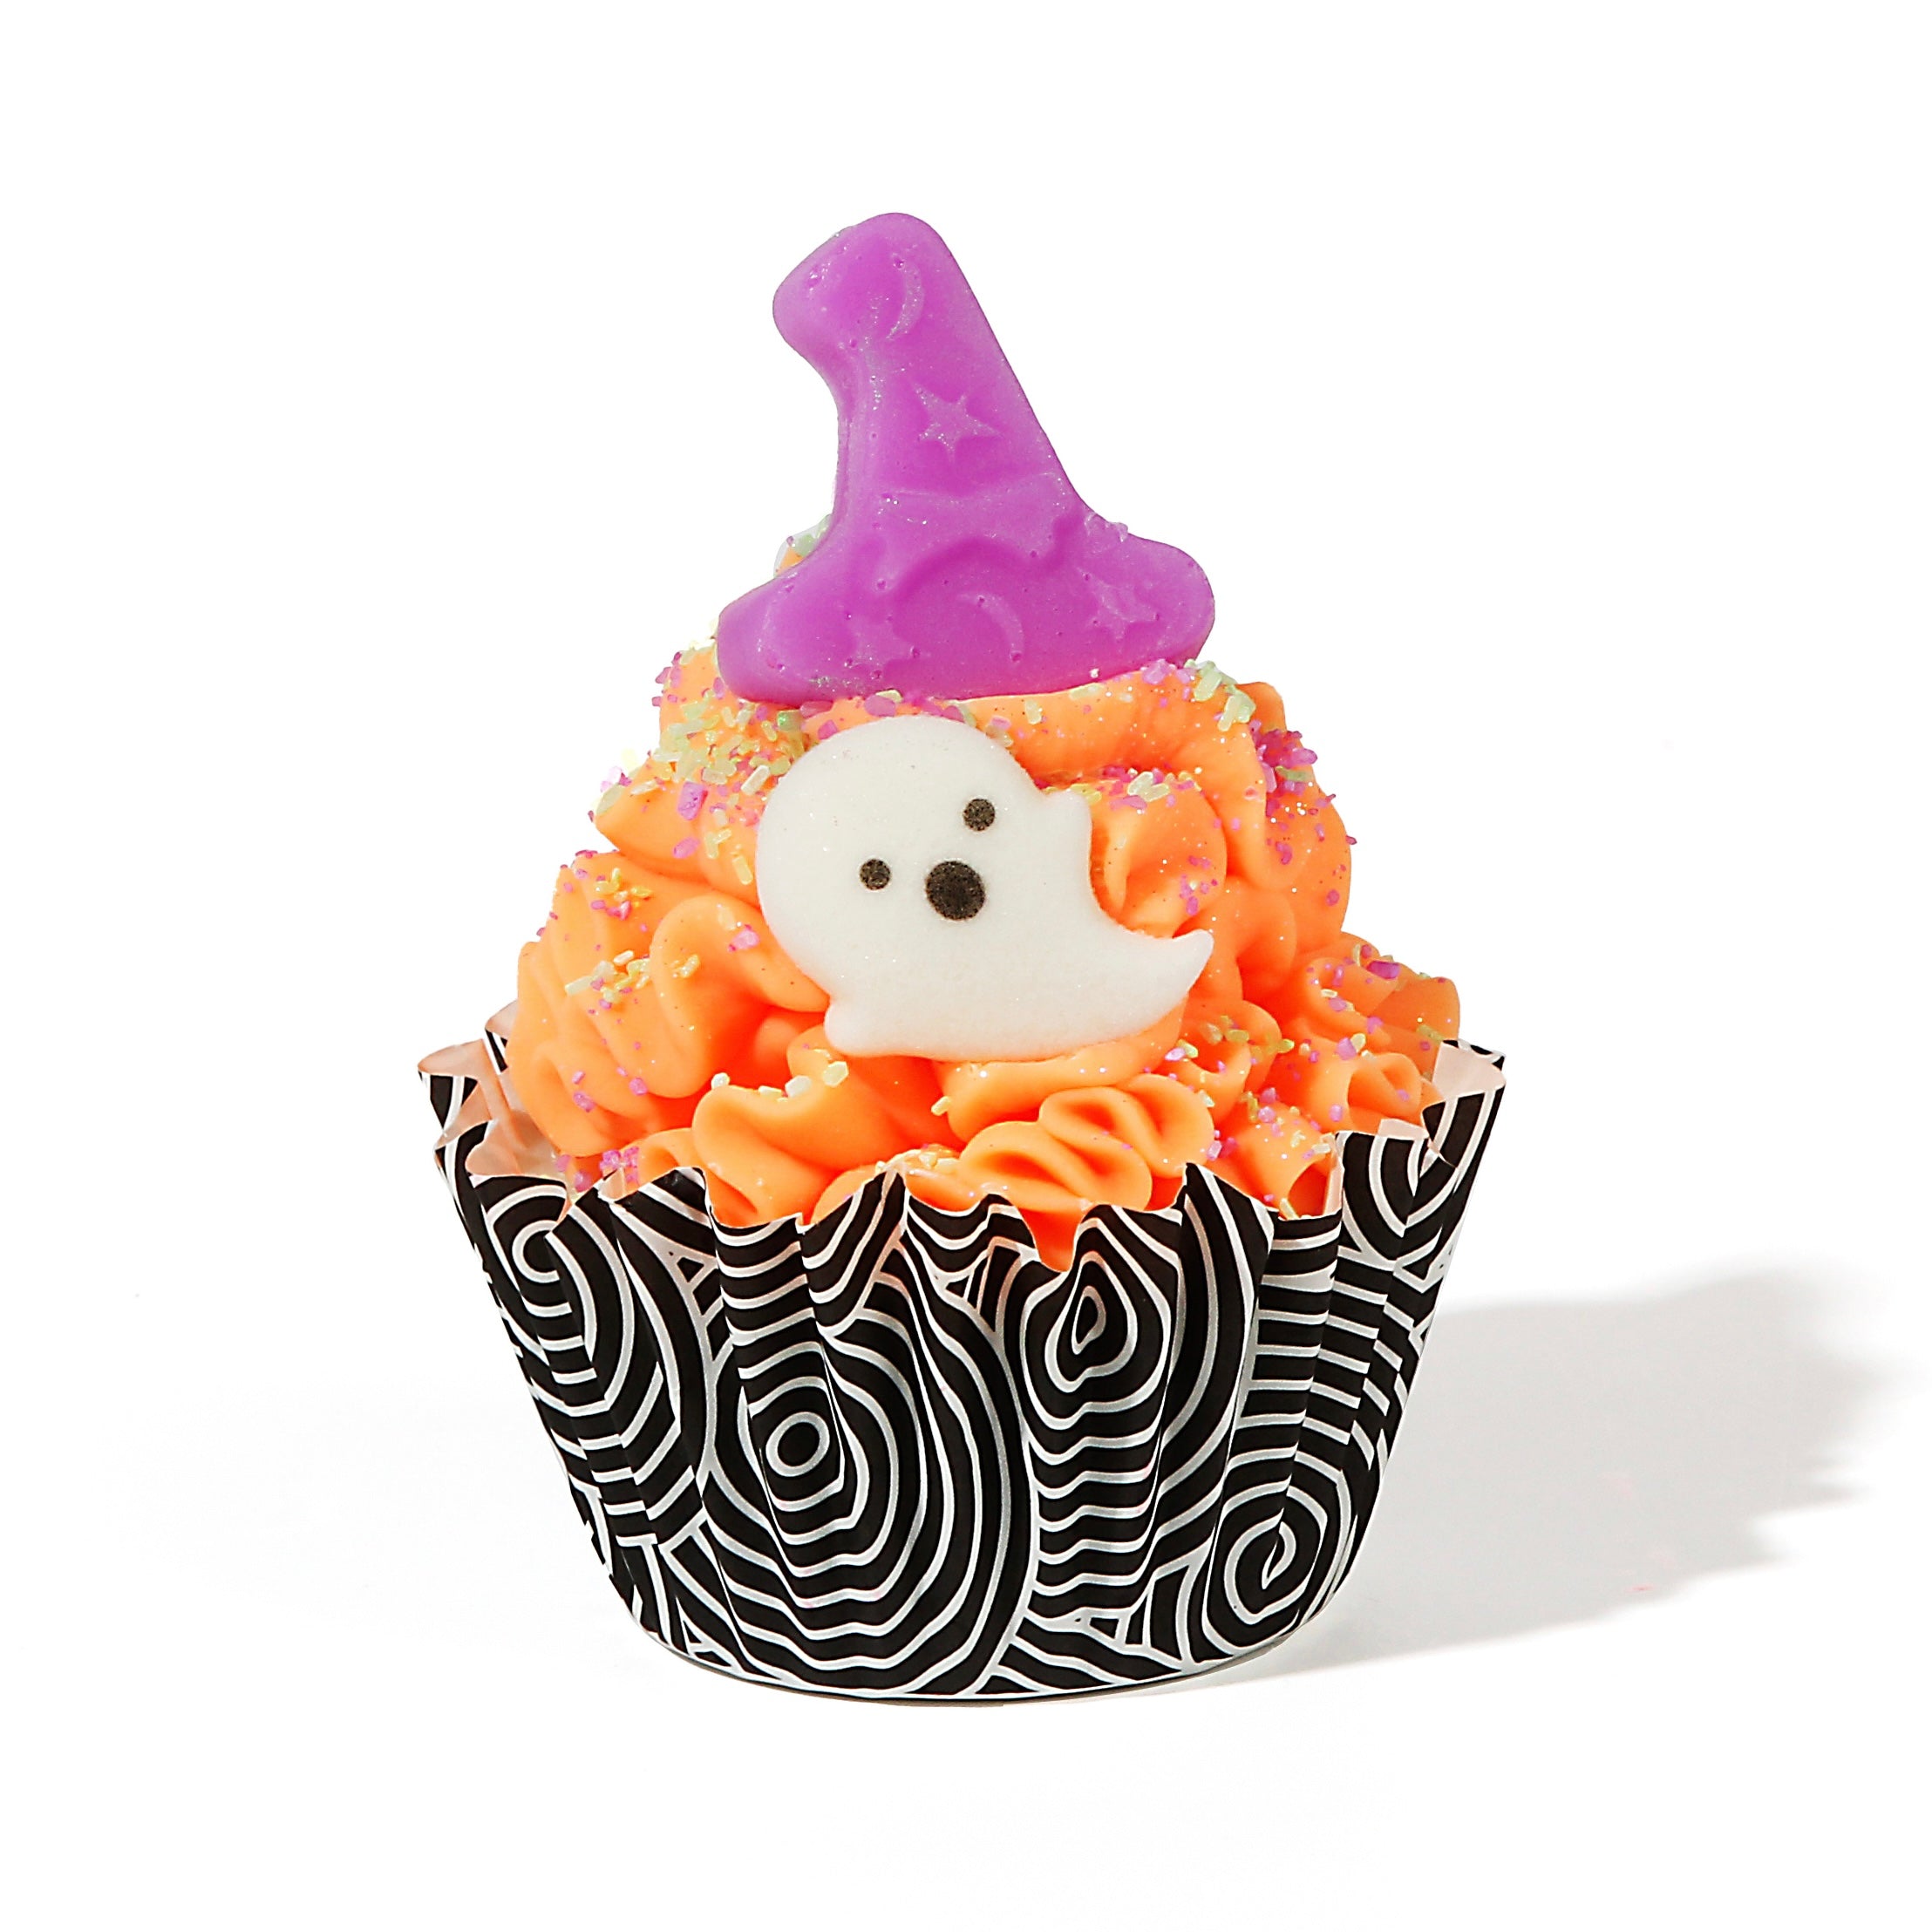 Realistic sized soap cupcake with a and black and white spiral patterned line. Bright orange soap frosting with a small ghost decoration and purple witch hat topper. 